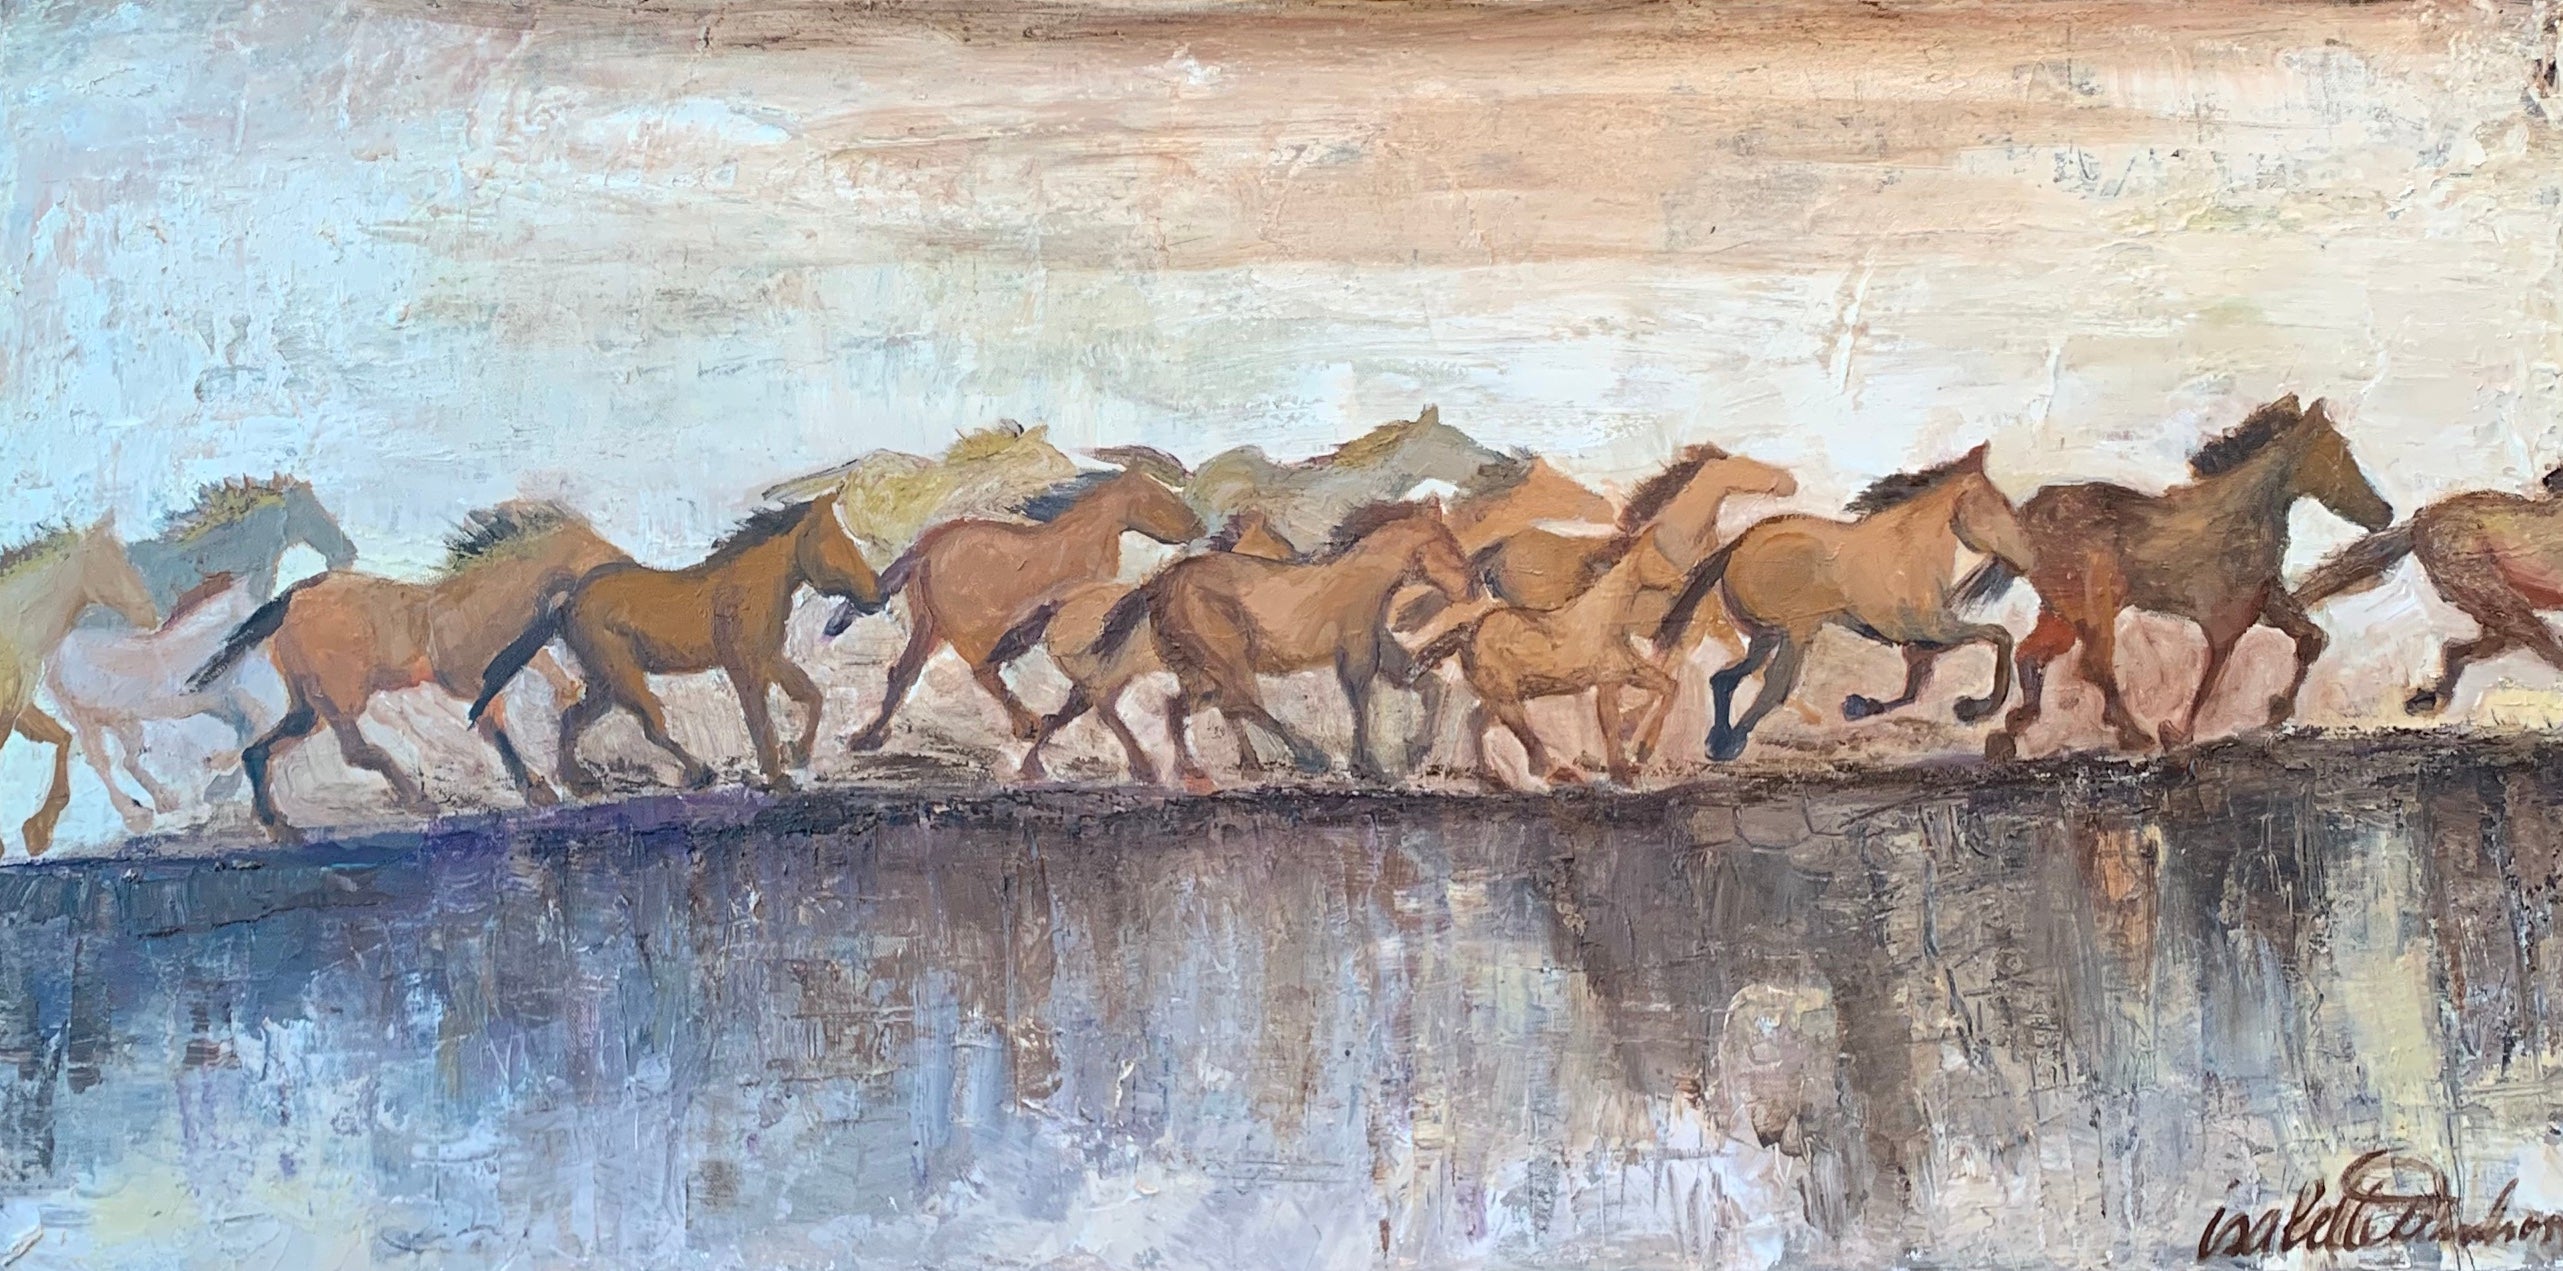 Energetic wild Kiger mustang horse herd from the Steens Mountain and Kiger Gorge, the high desert region of East Oregon in subtle warm neutrals with touches of cool nuance. A showpiece for any wall in your home or office.isabelle truchon art